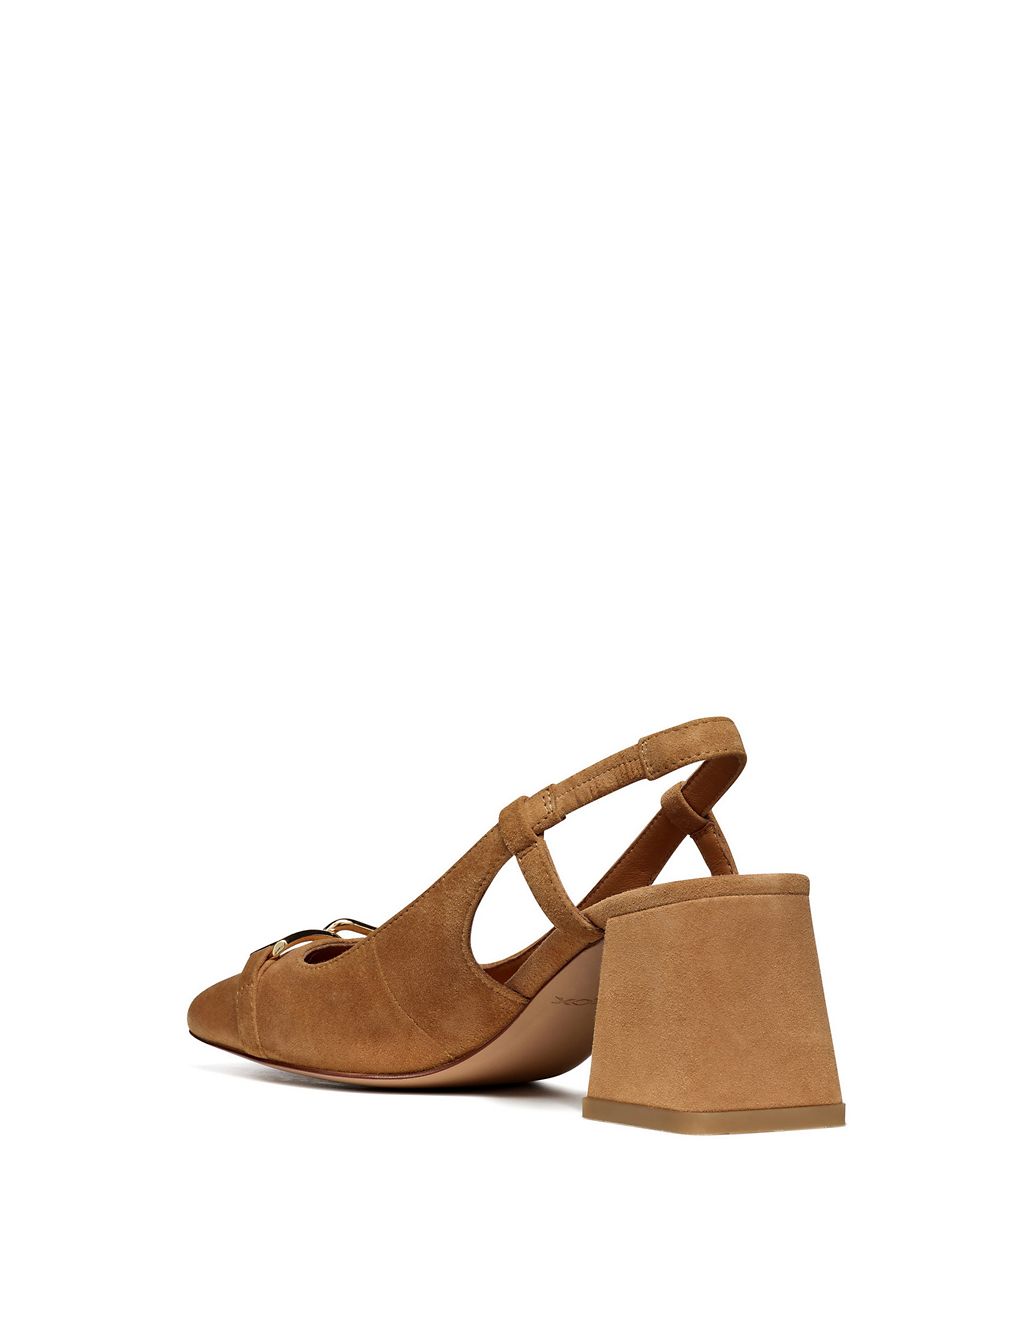 Suede Block Heel Square Toe Slingback Shoes 2 of 6